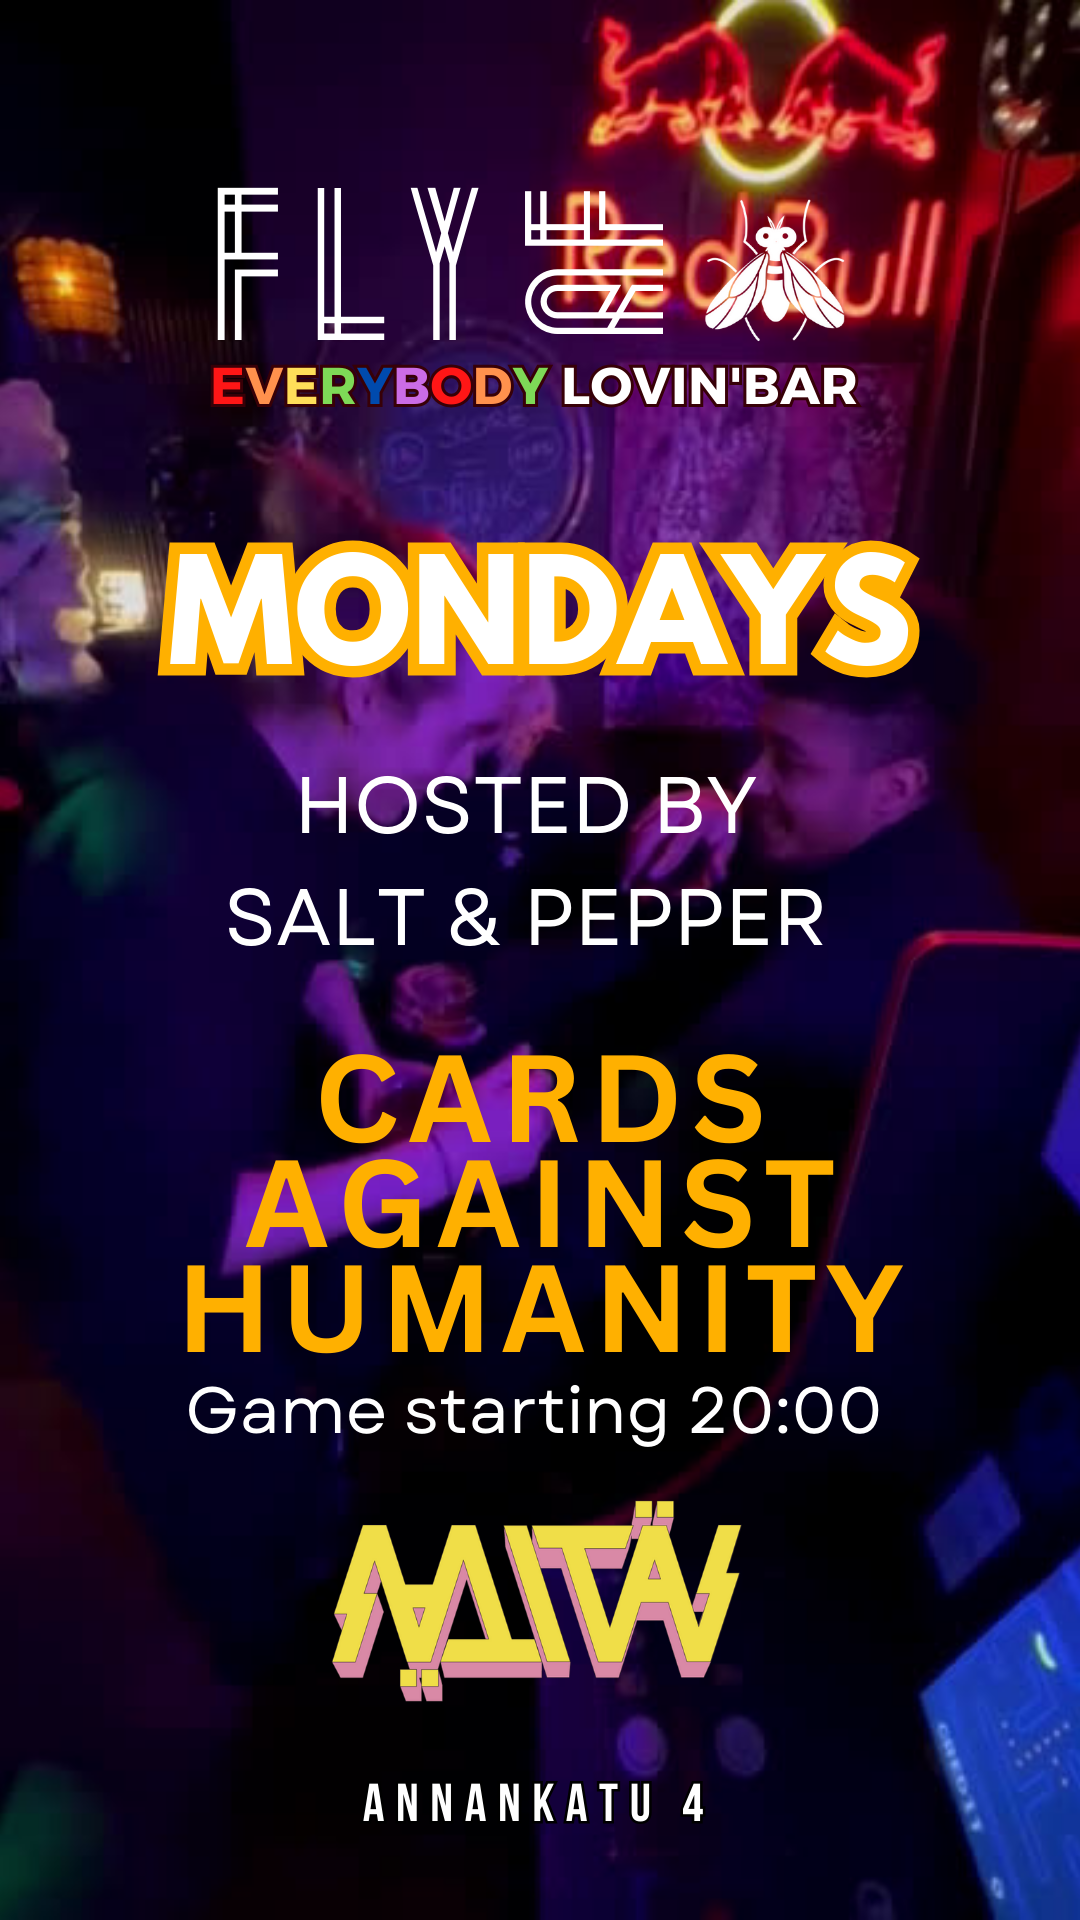 WIN 2 full tickets @mitasmitasmitas festival - as the main prize for our FlyAF bar olympics. Every Monday a new game, this monday "CARDS AGAINST HUMANITY" Hosted by the incredible duo Salt & Pepper, so join in and unleash your inner comedian!